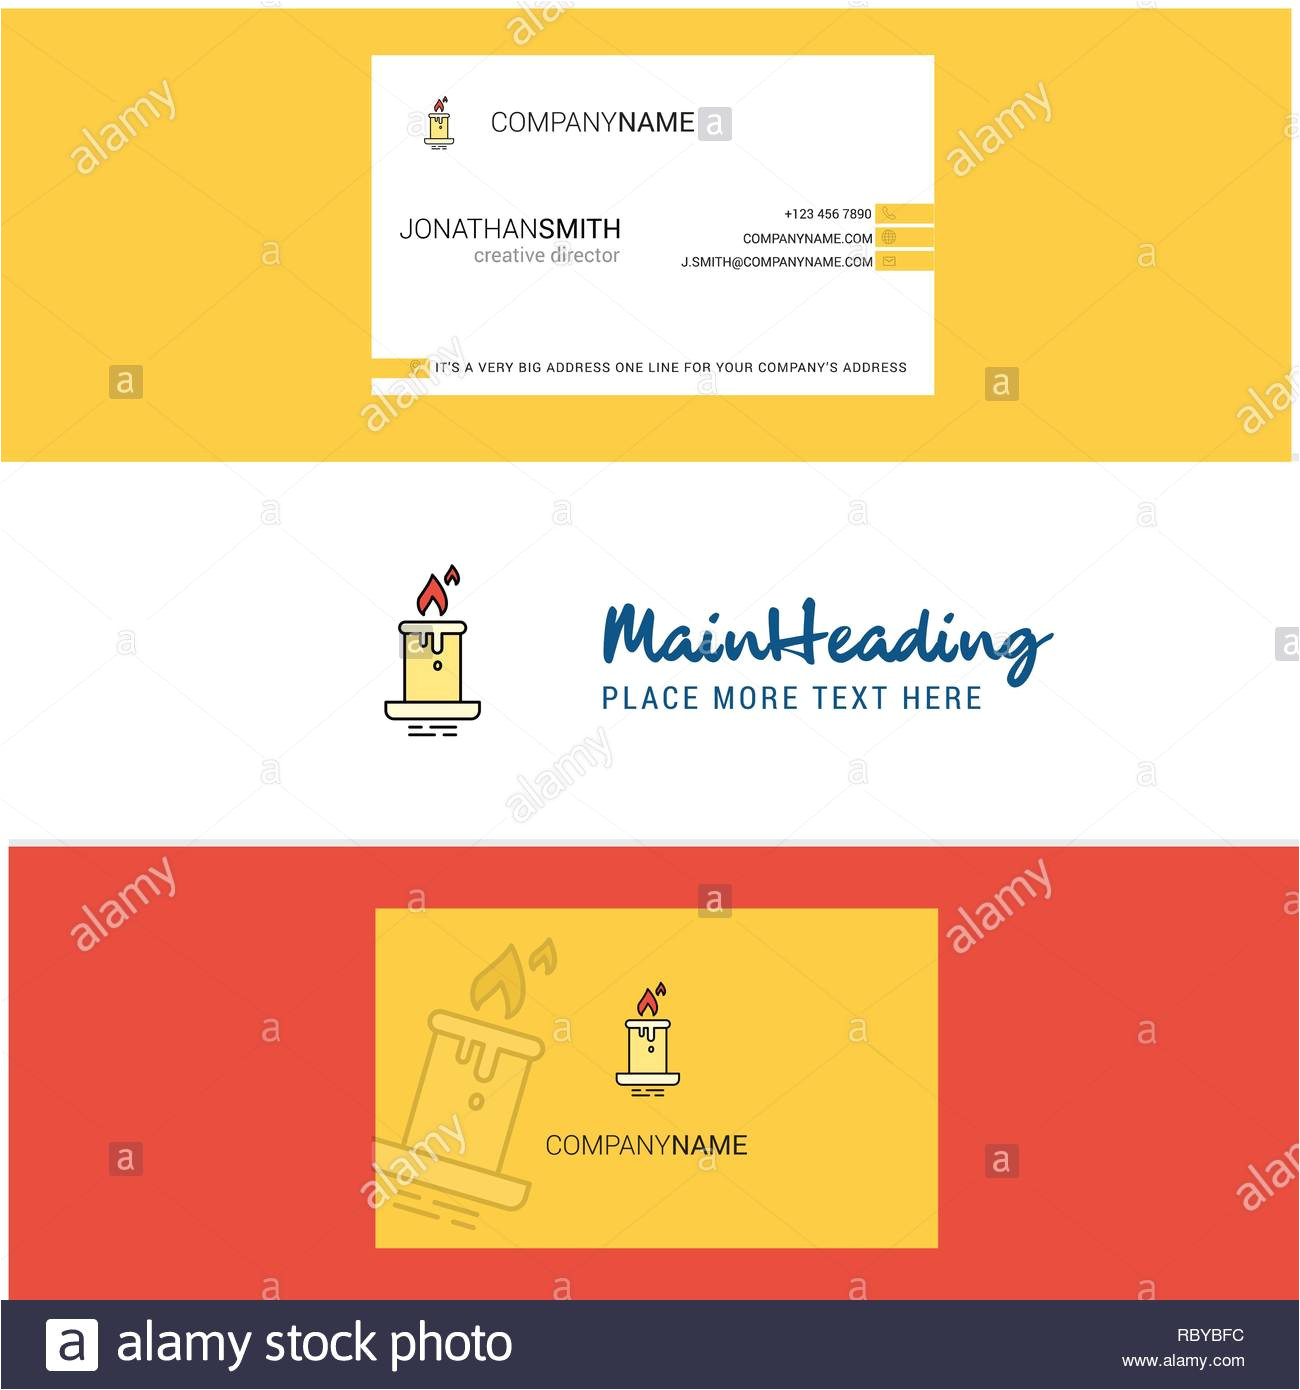 beautiful candle logo and business card vertical design vector rbybfc jpg